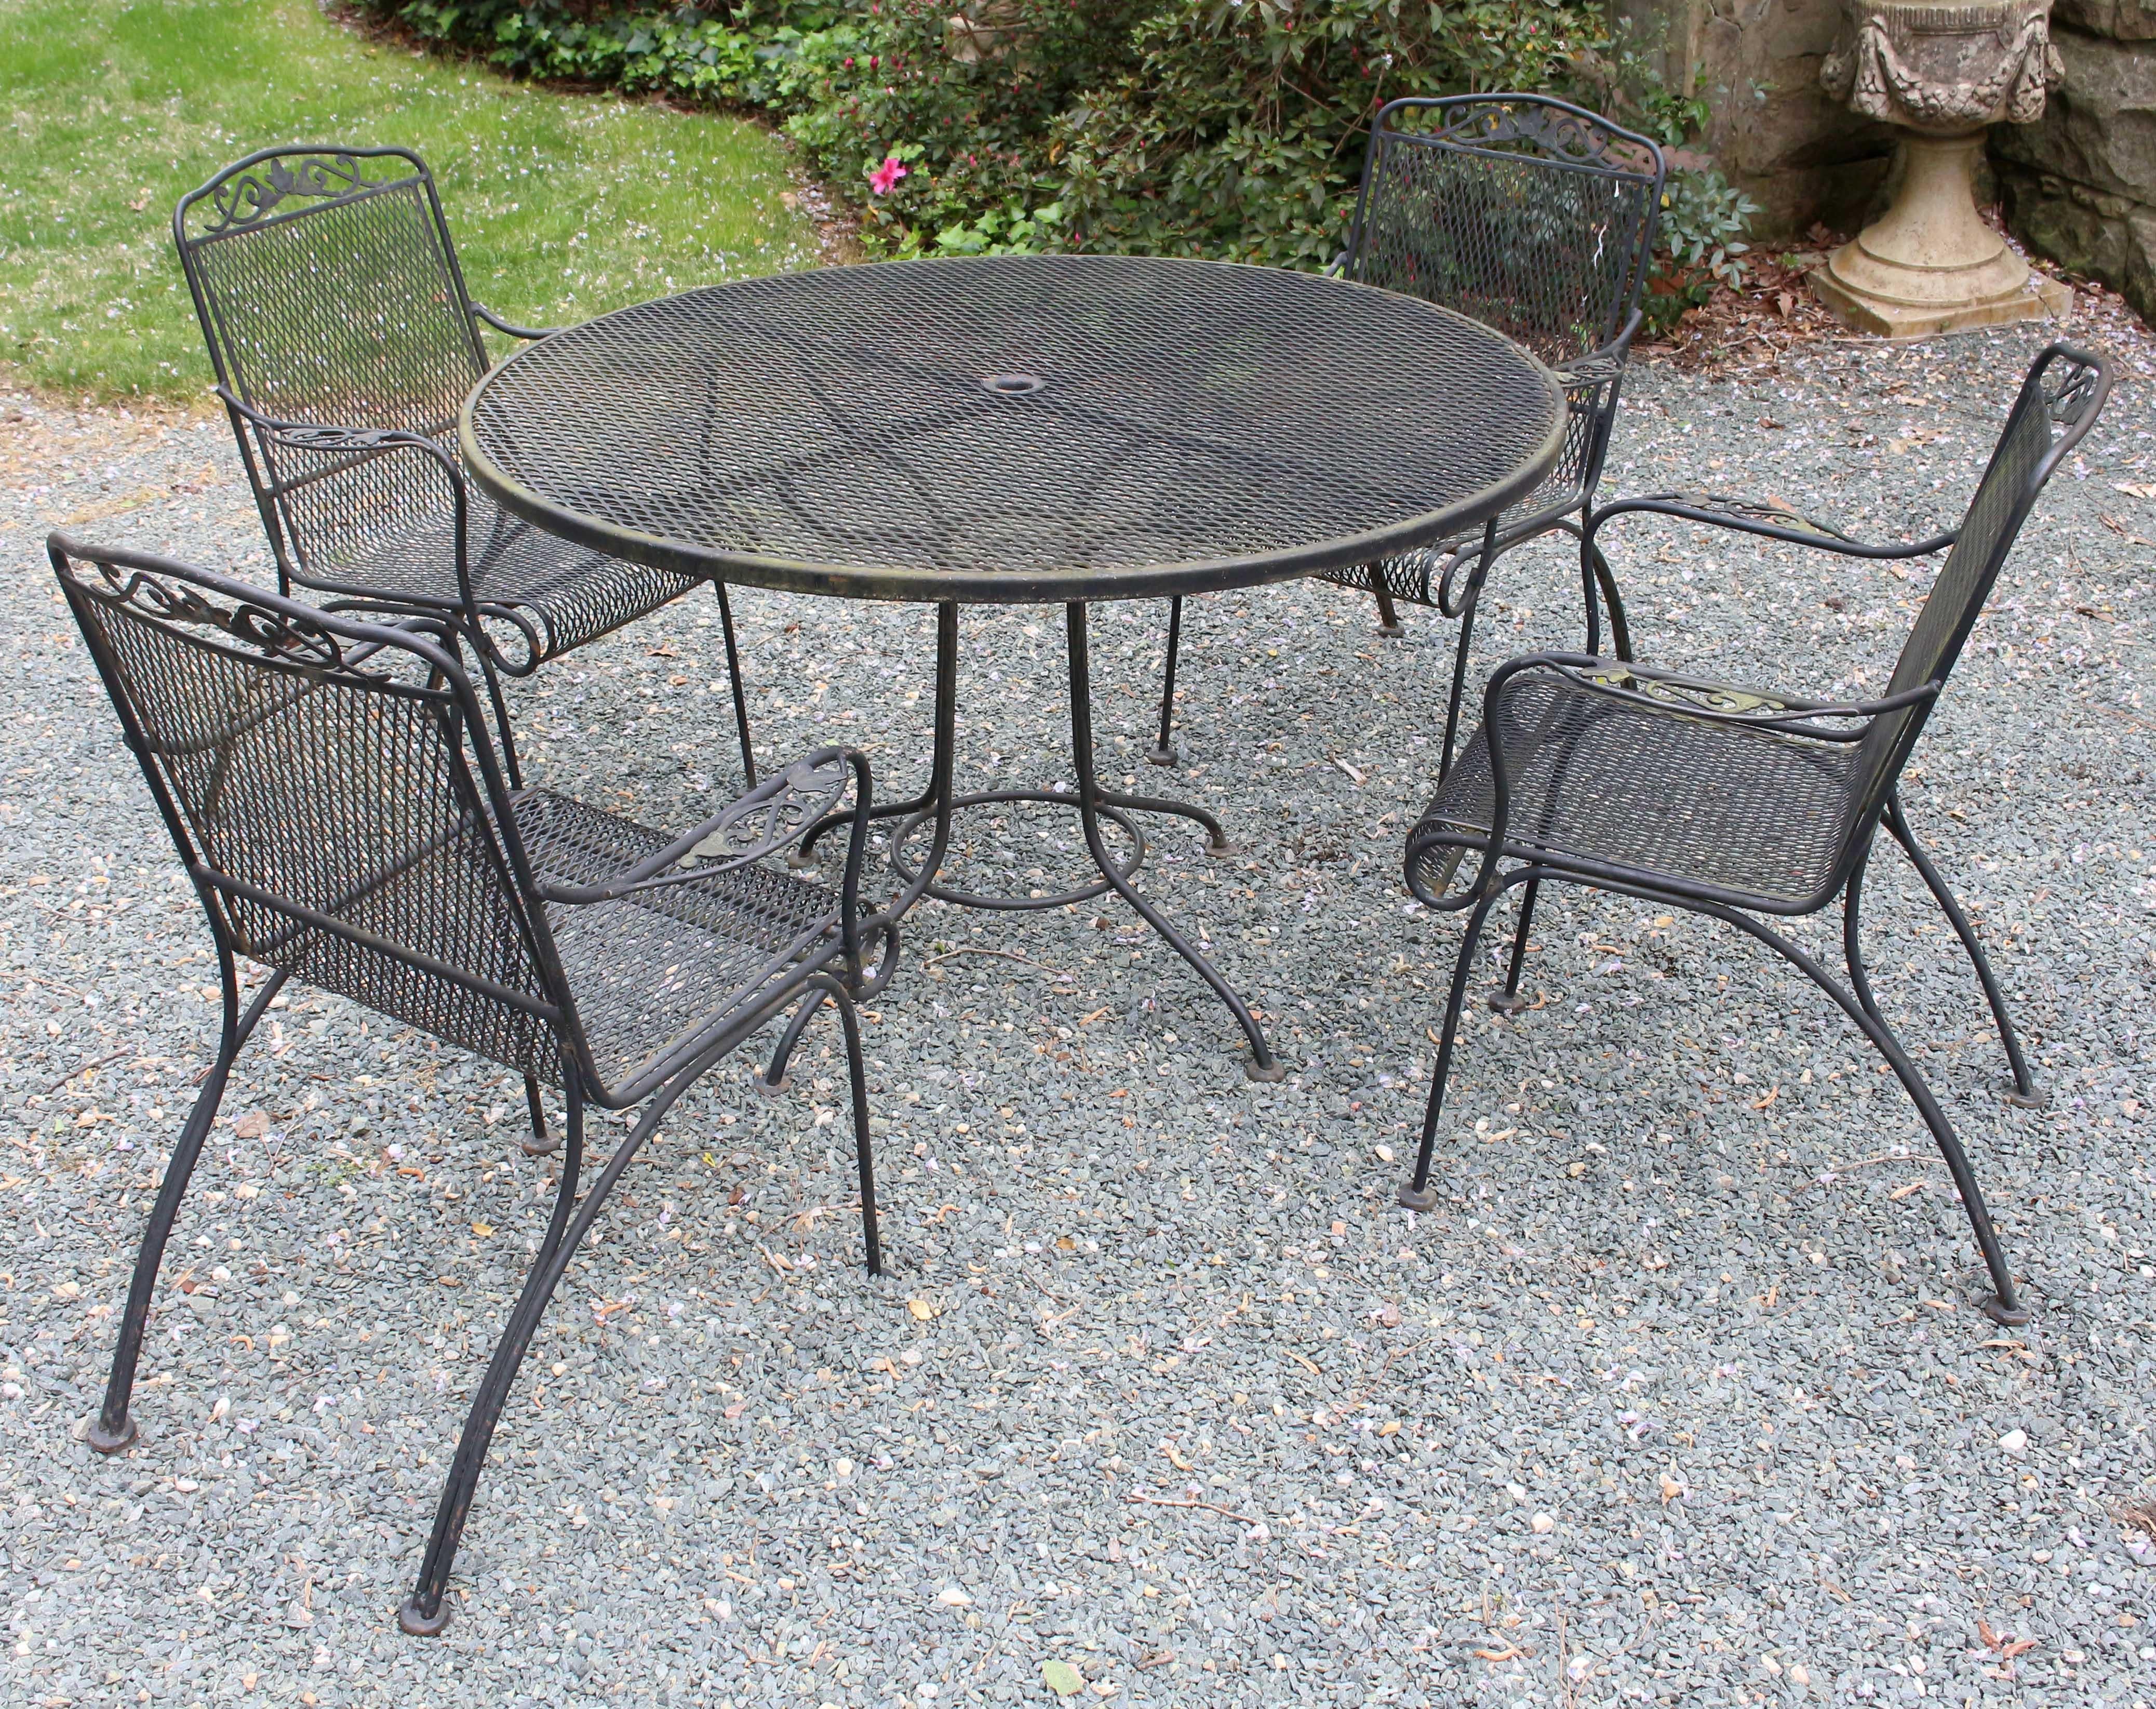 Mid-20th century Woodard wrought iron table & 4 arm chairs. Ivy motifs; scroll & roll arms. Black paint, weathered patina.
Table: 47